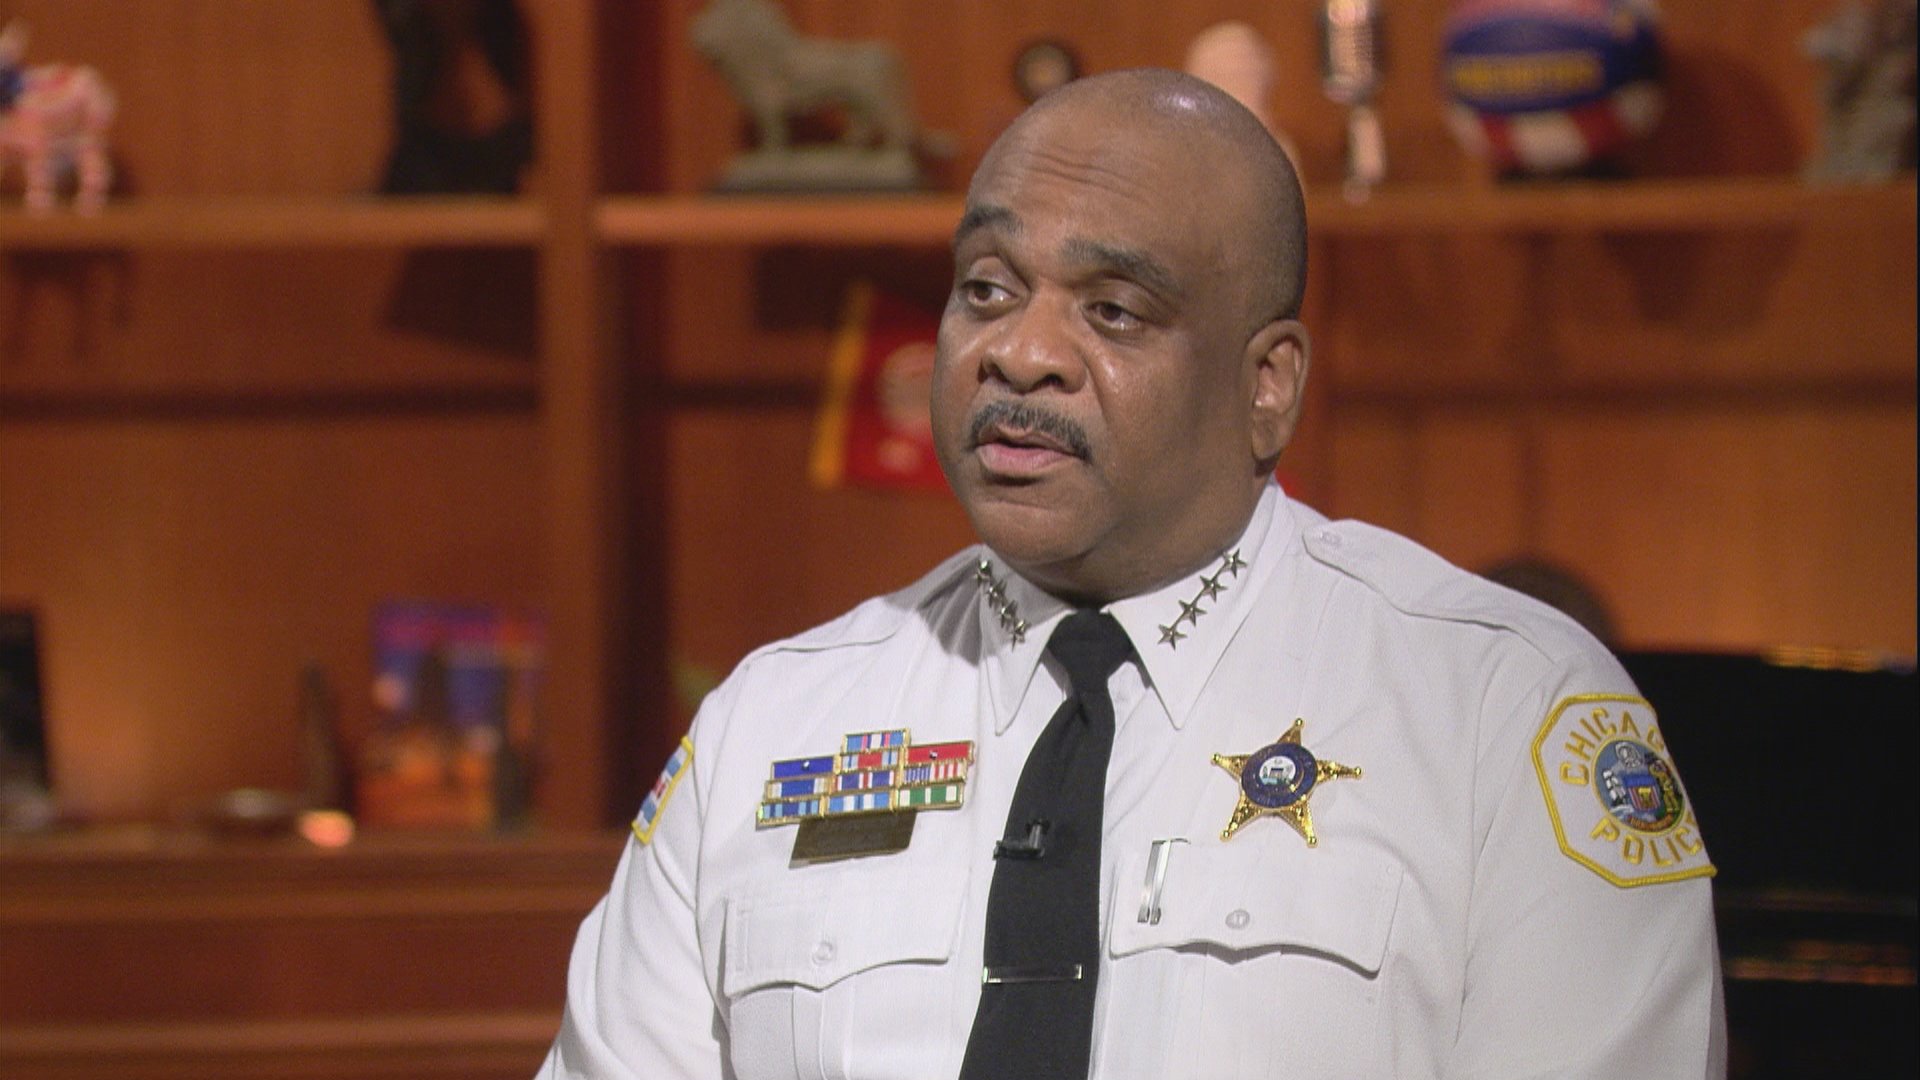 Chicago Police Superintendent Eddie Johnson appears on “Chicago Tonight” on Aug. 9, 2018.